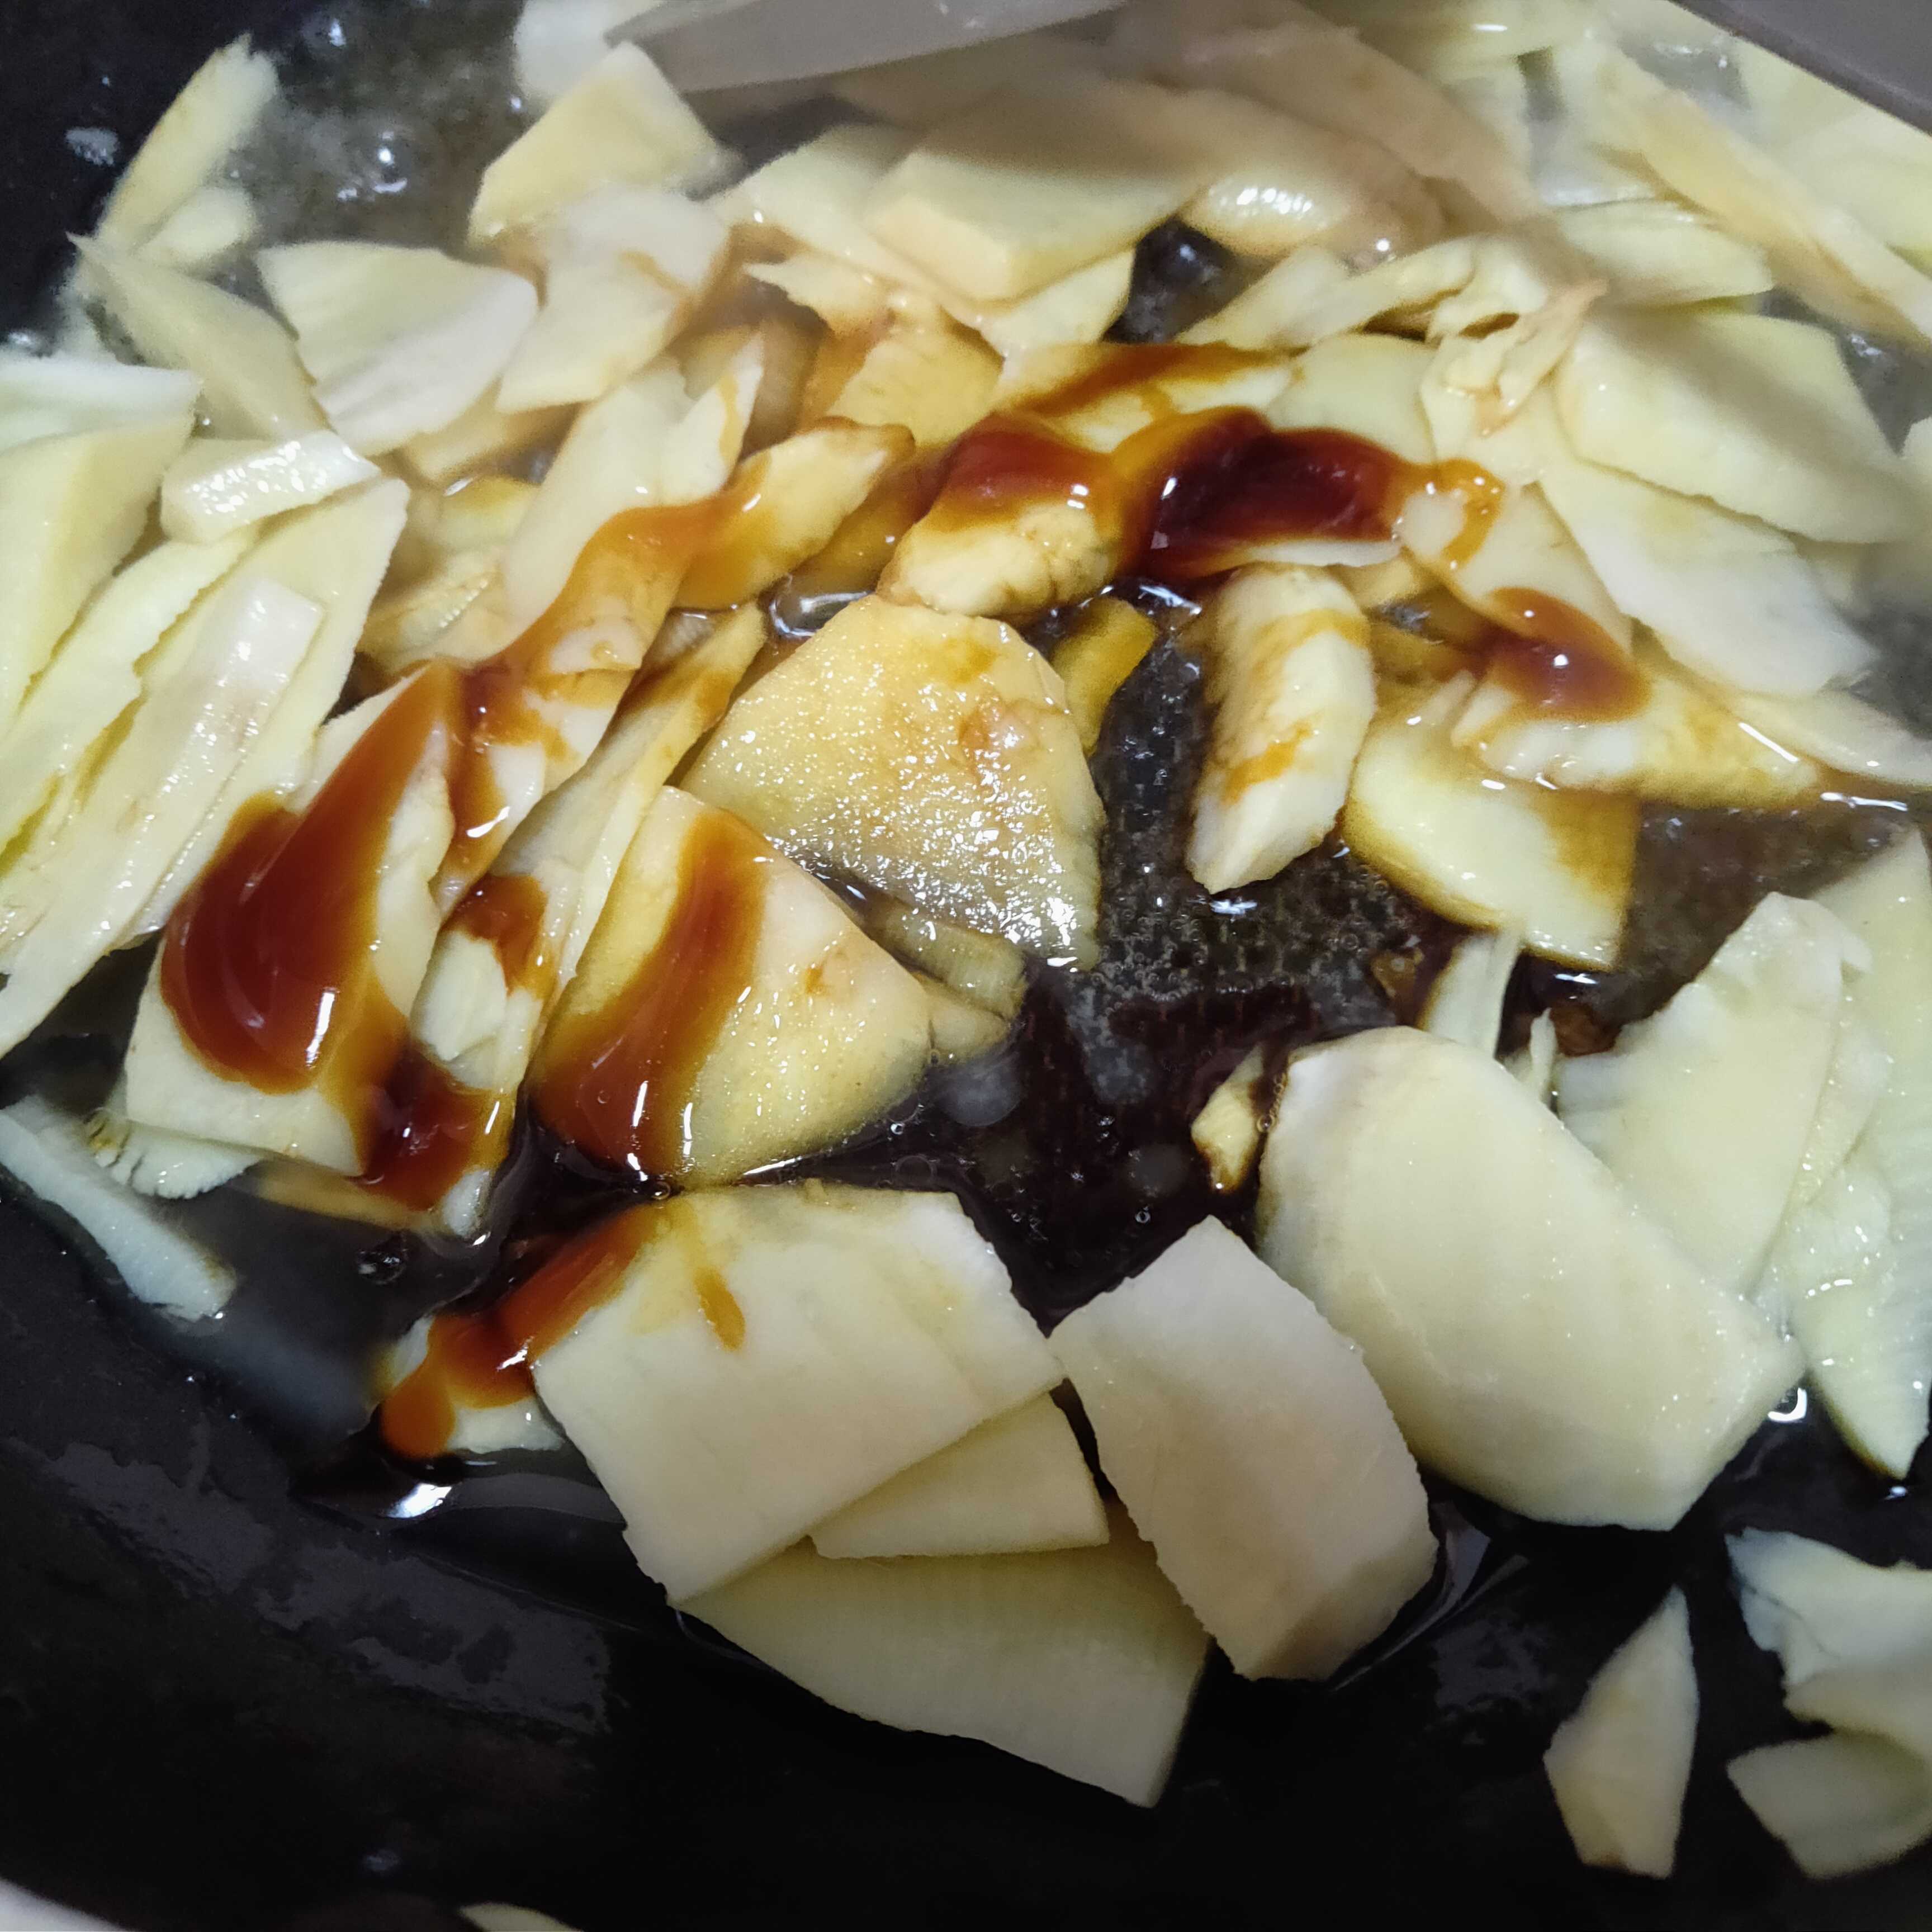 Braised Spring Bamboo Shoots in Oil recipe